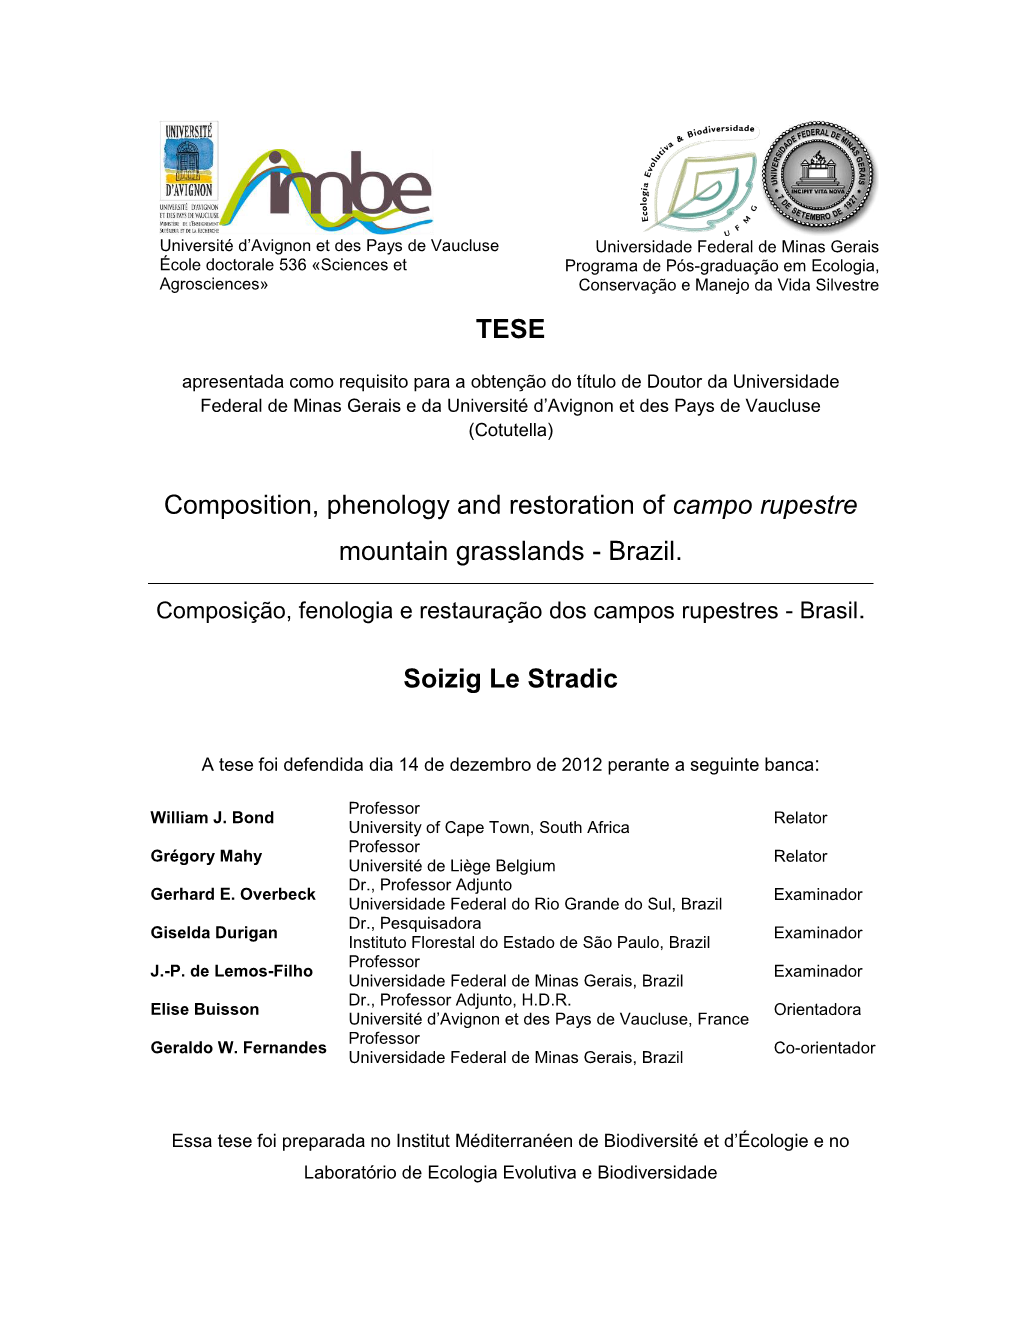 TESE Composition, Phenology and Restoration of Campo Rupestre